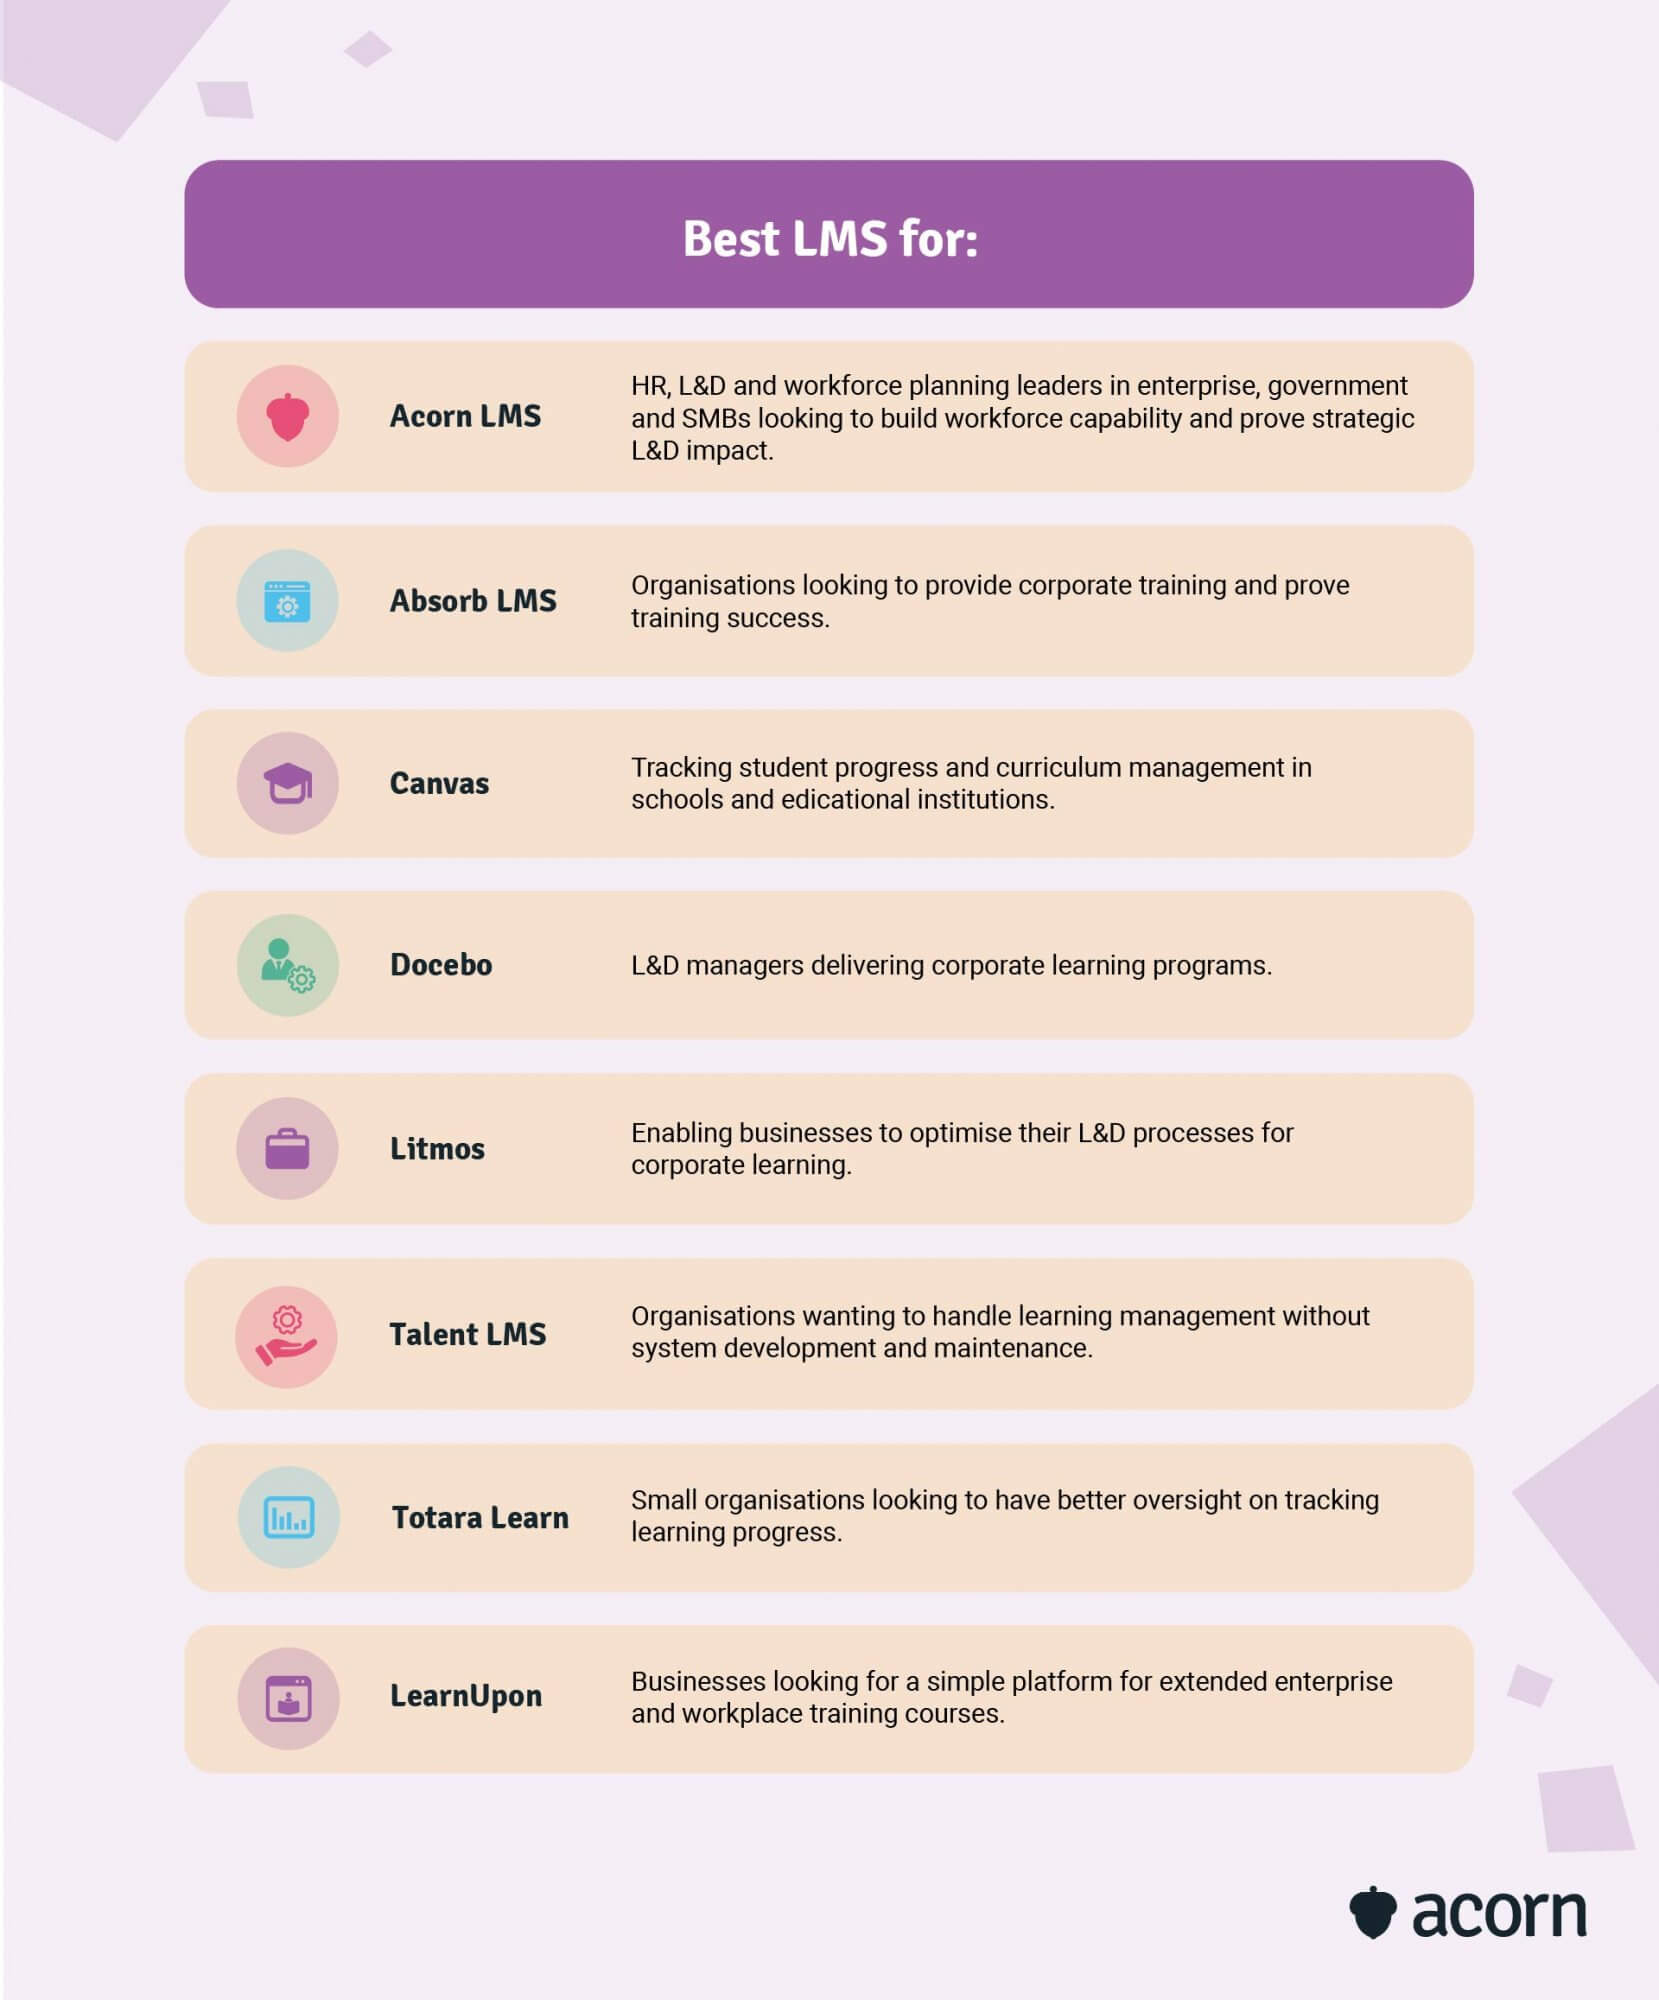 The top 8 best LMS and who they are best for